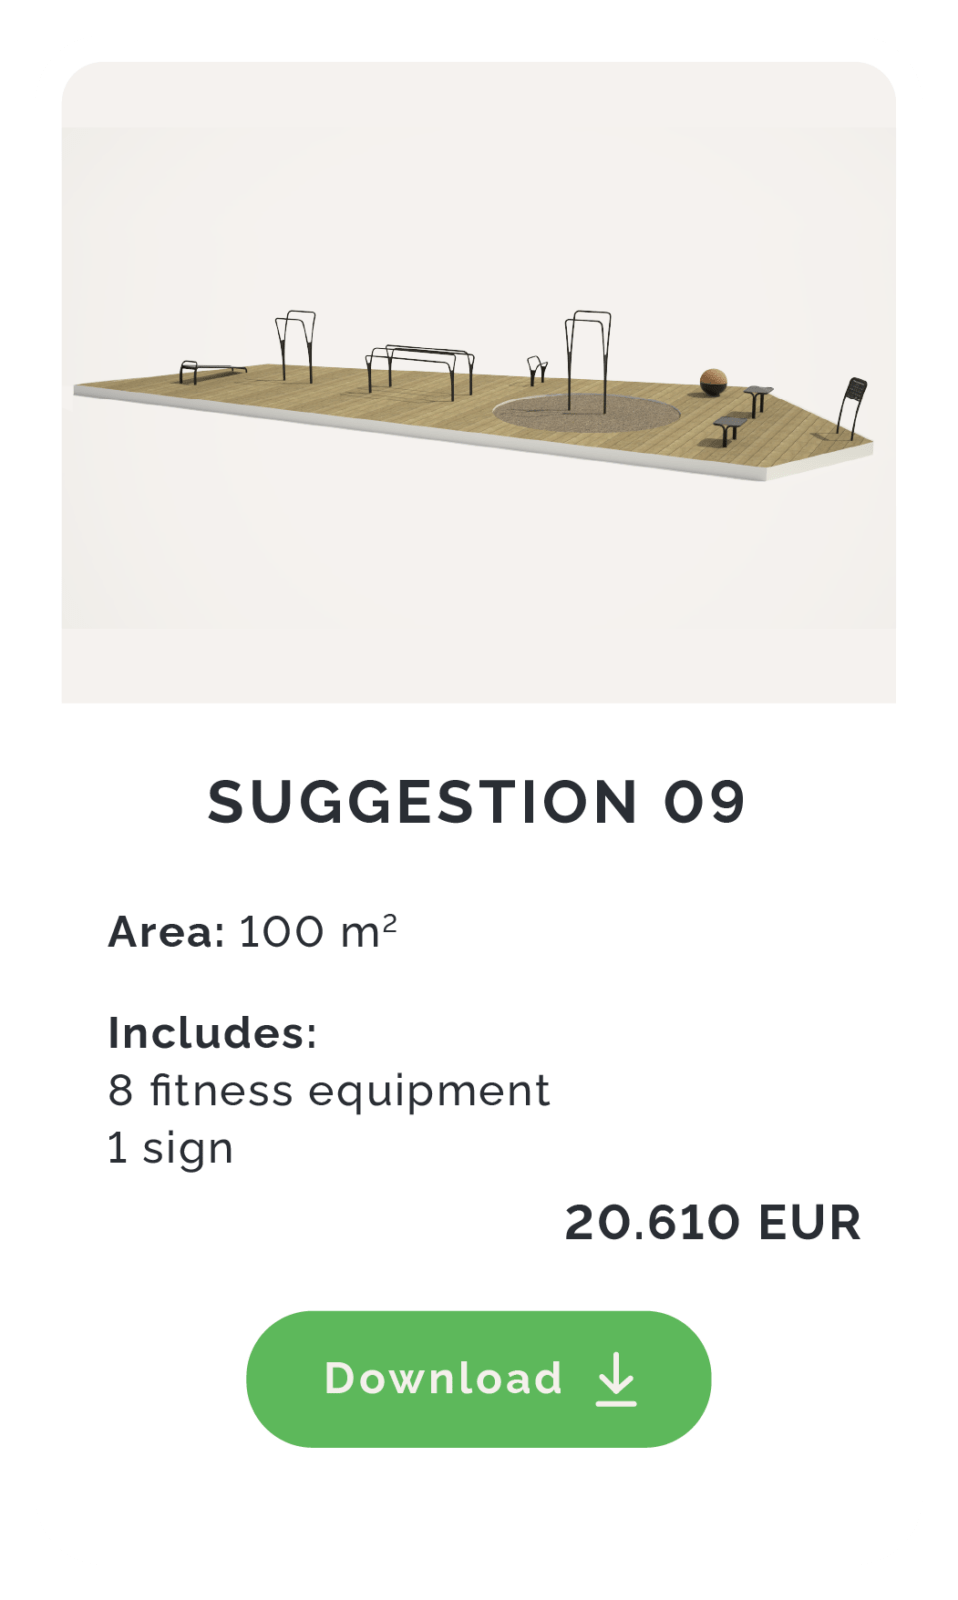 Idea for sport and fitness area with durable equipment